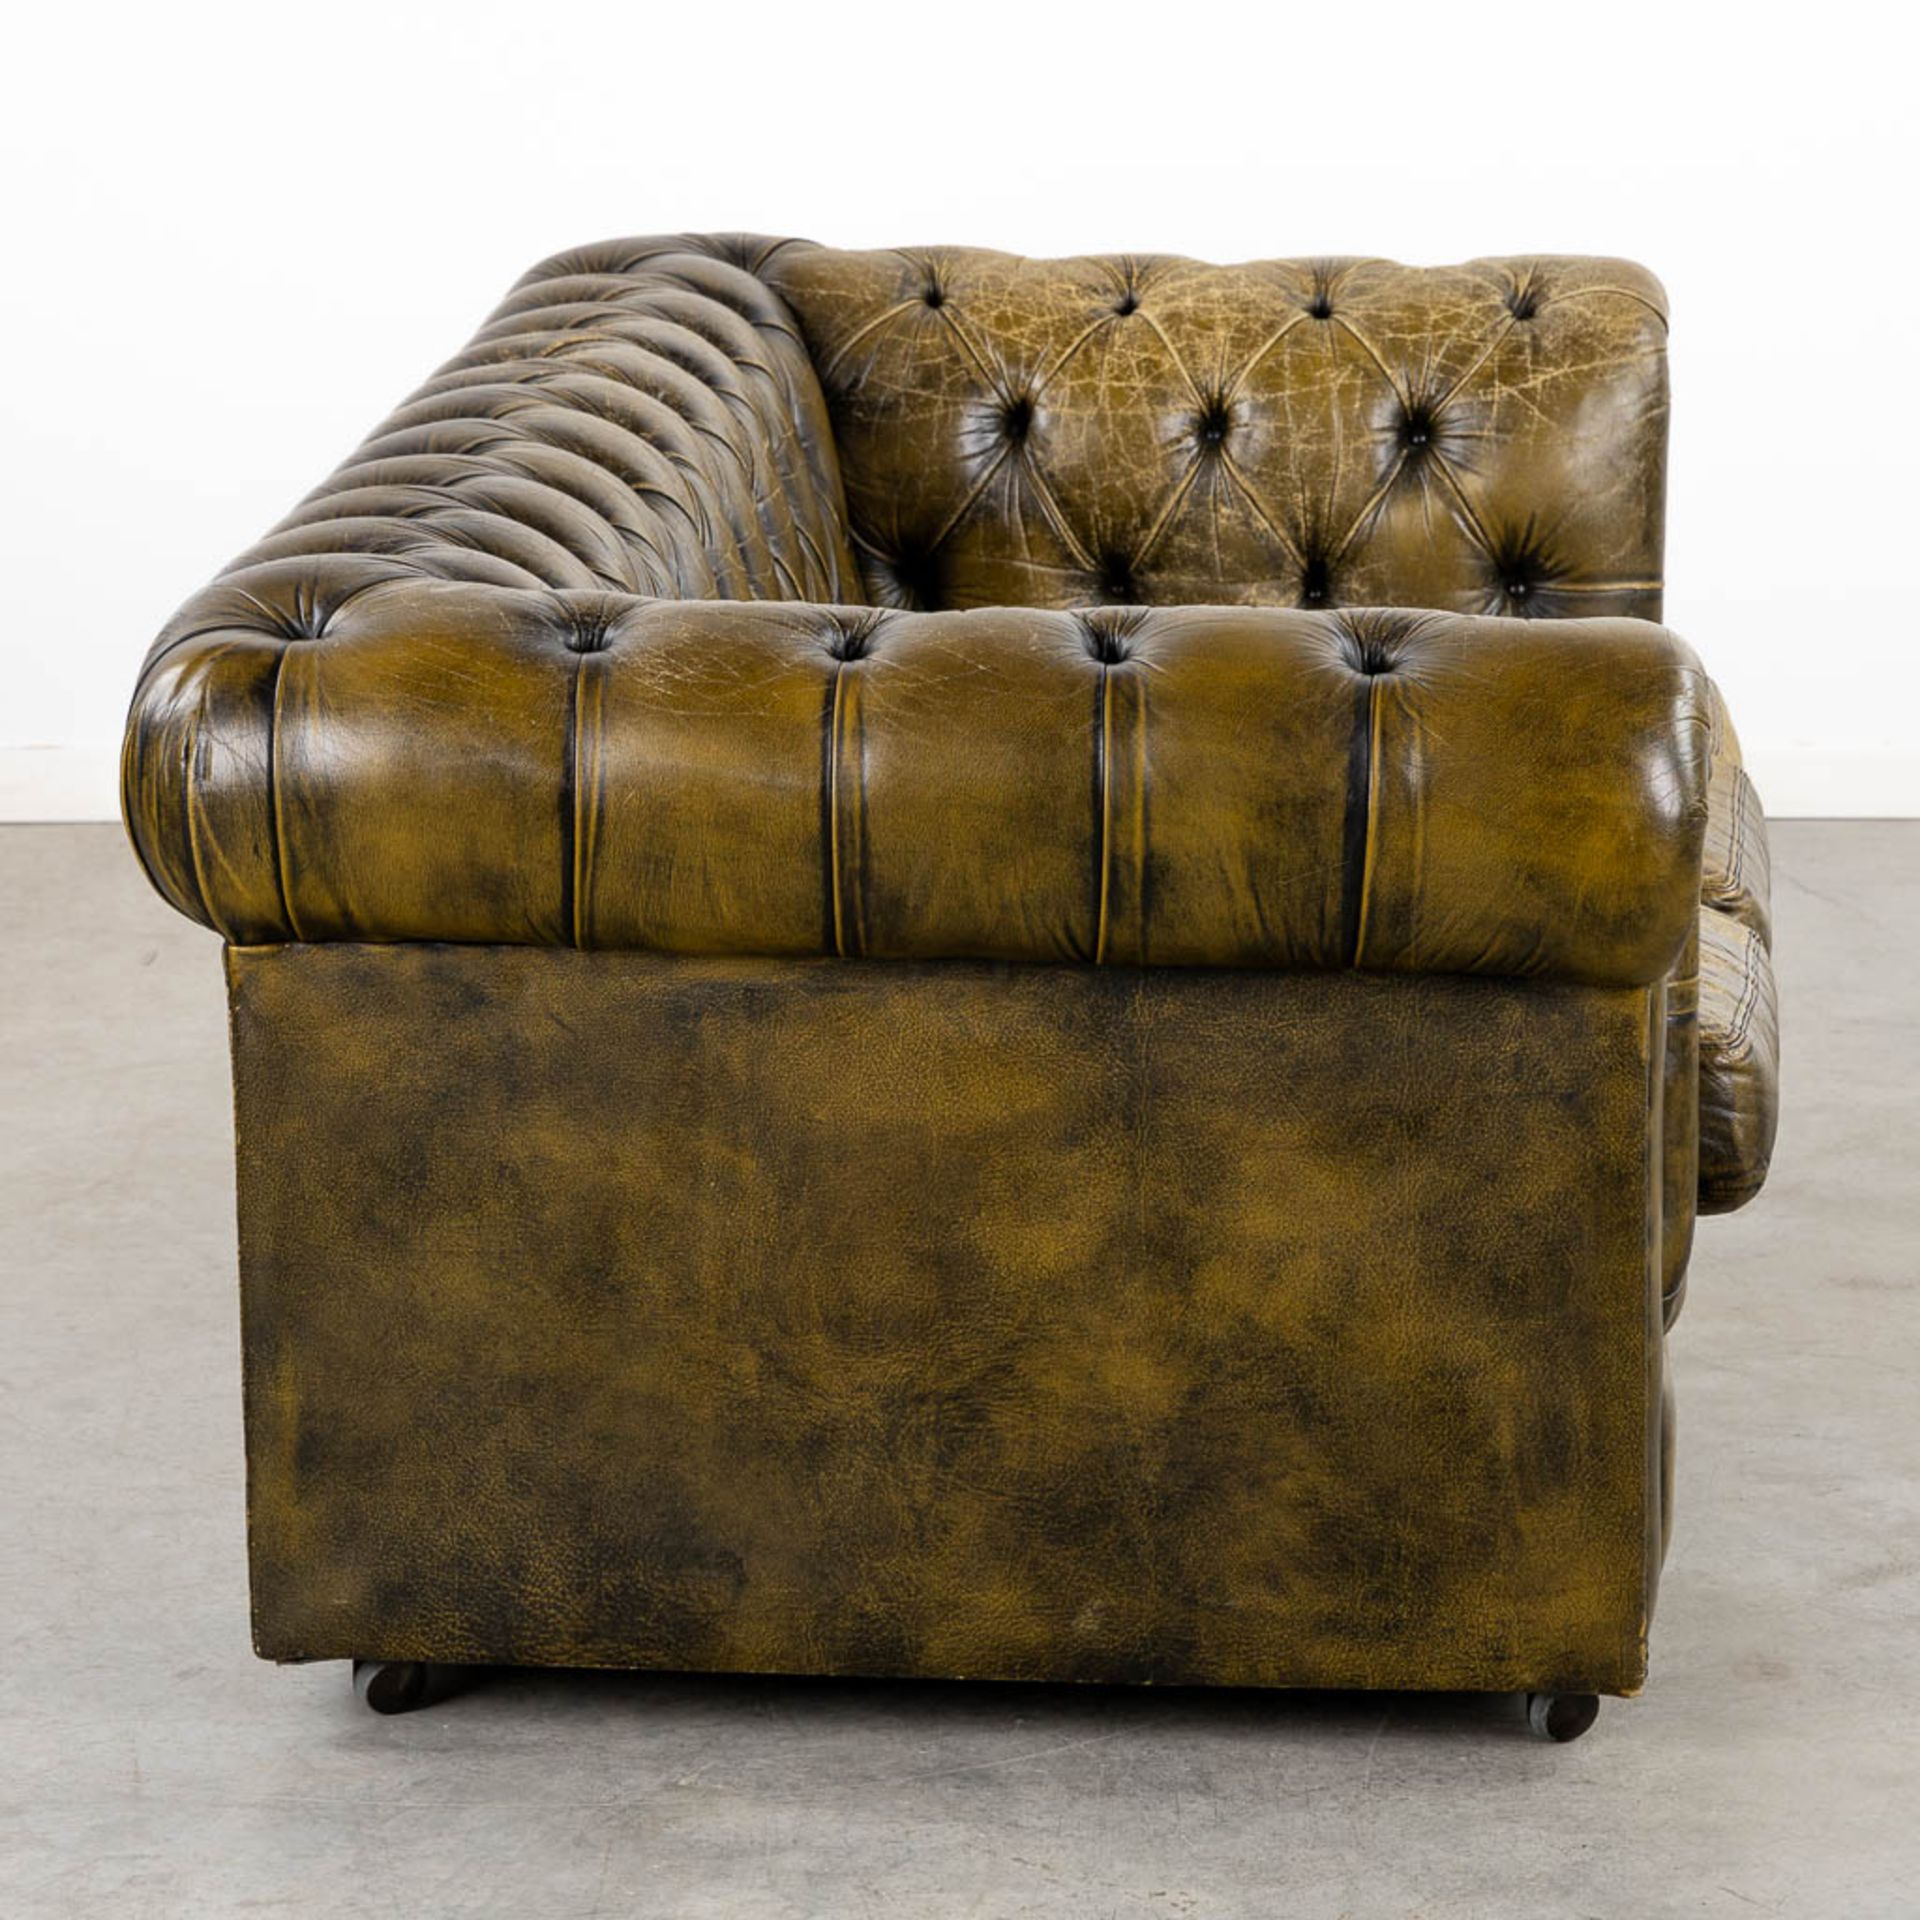 A Chesterfield three-person, green leather sofa. (L:90 x W:188 x H:68 cm) - Image 6 of 13